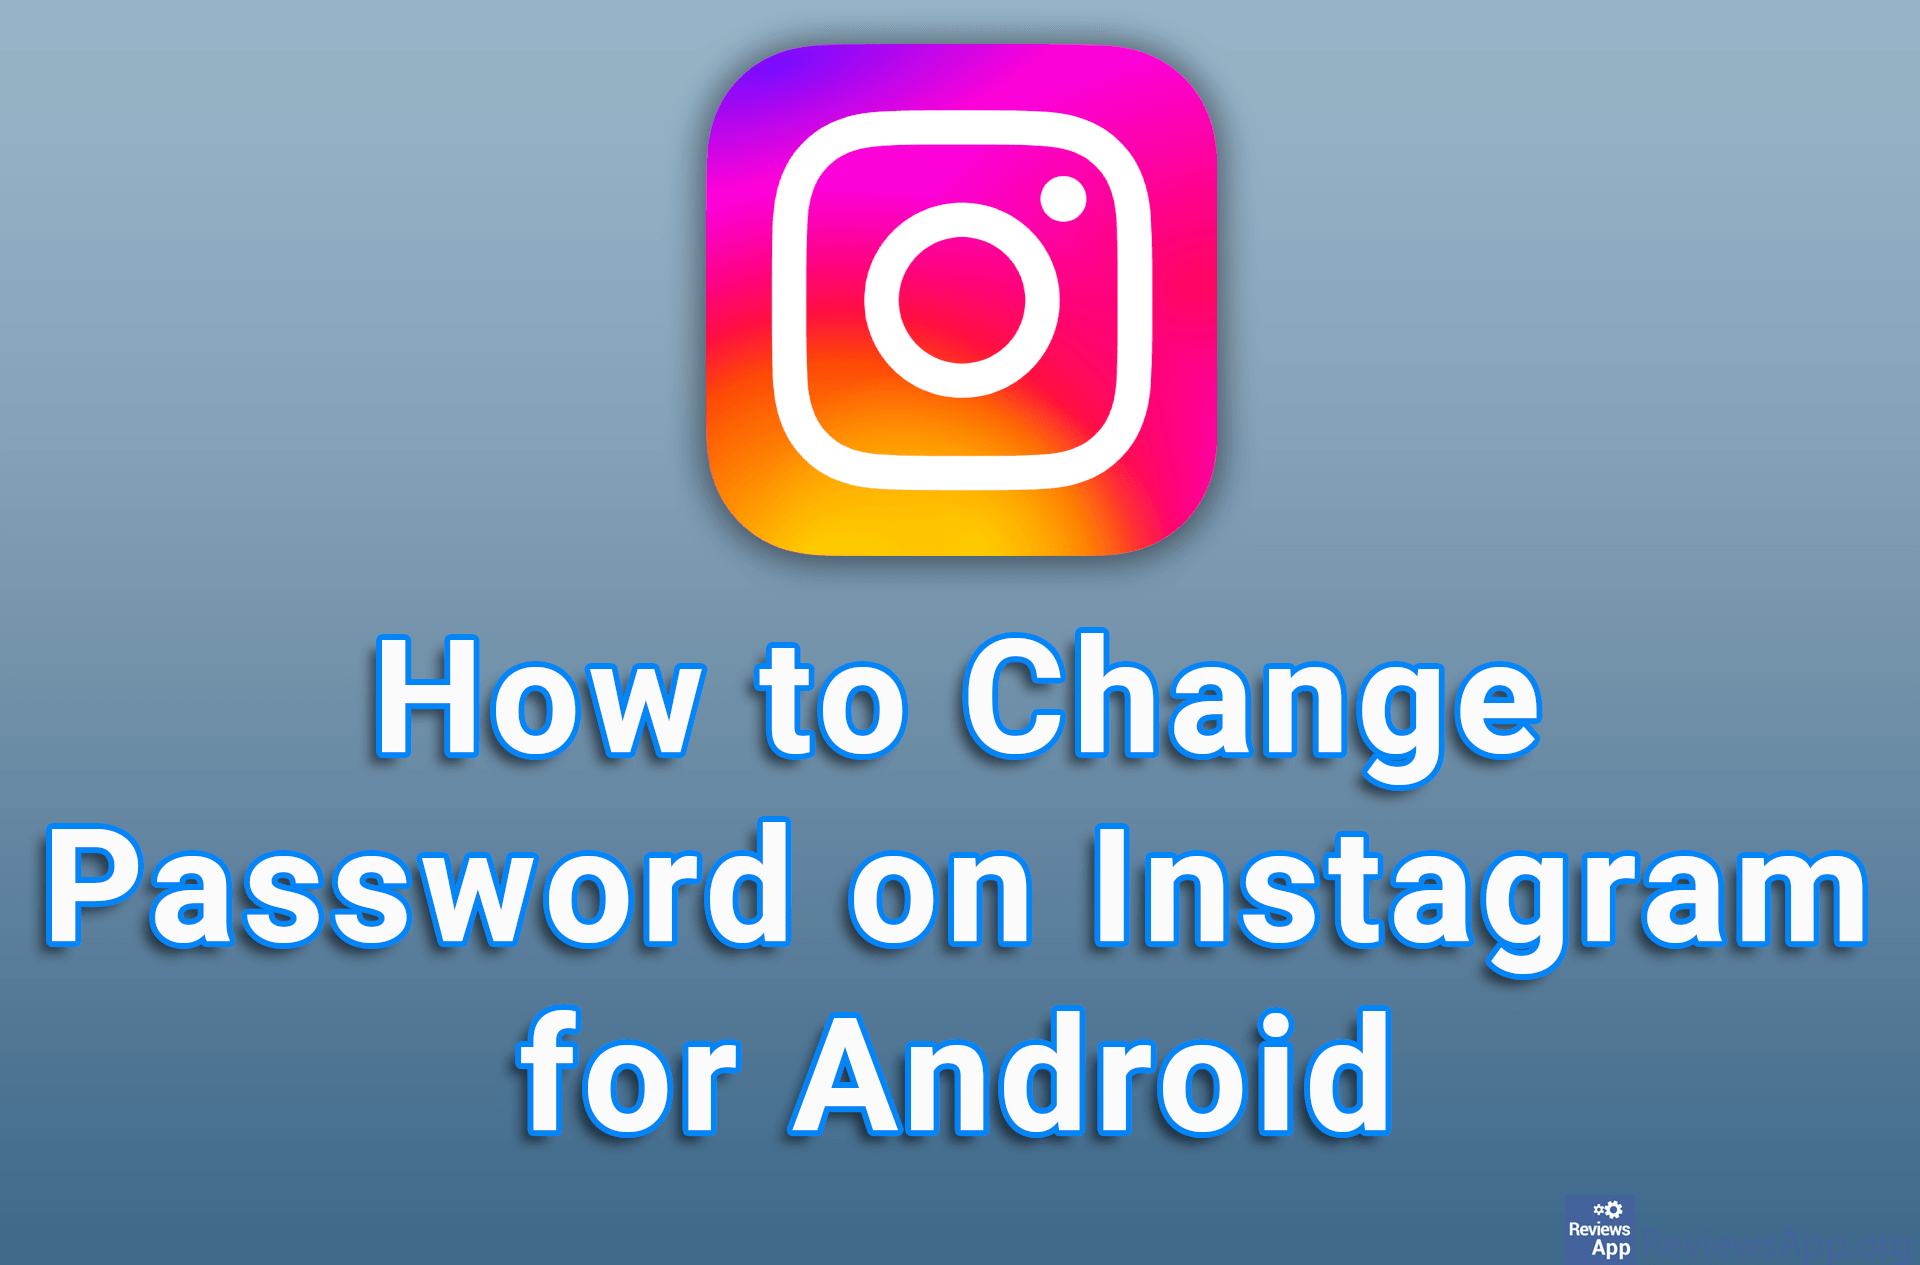 How to Change Password on Instagram for Android